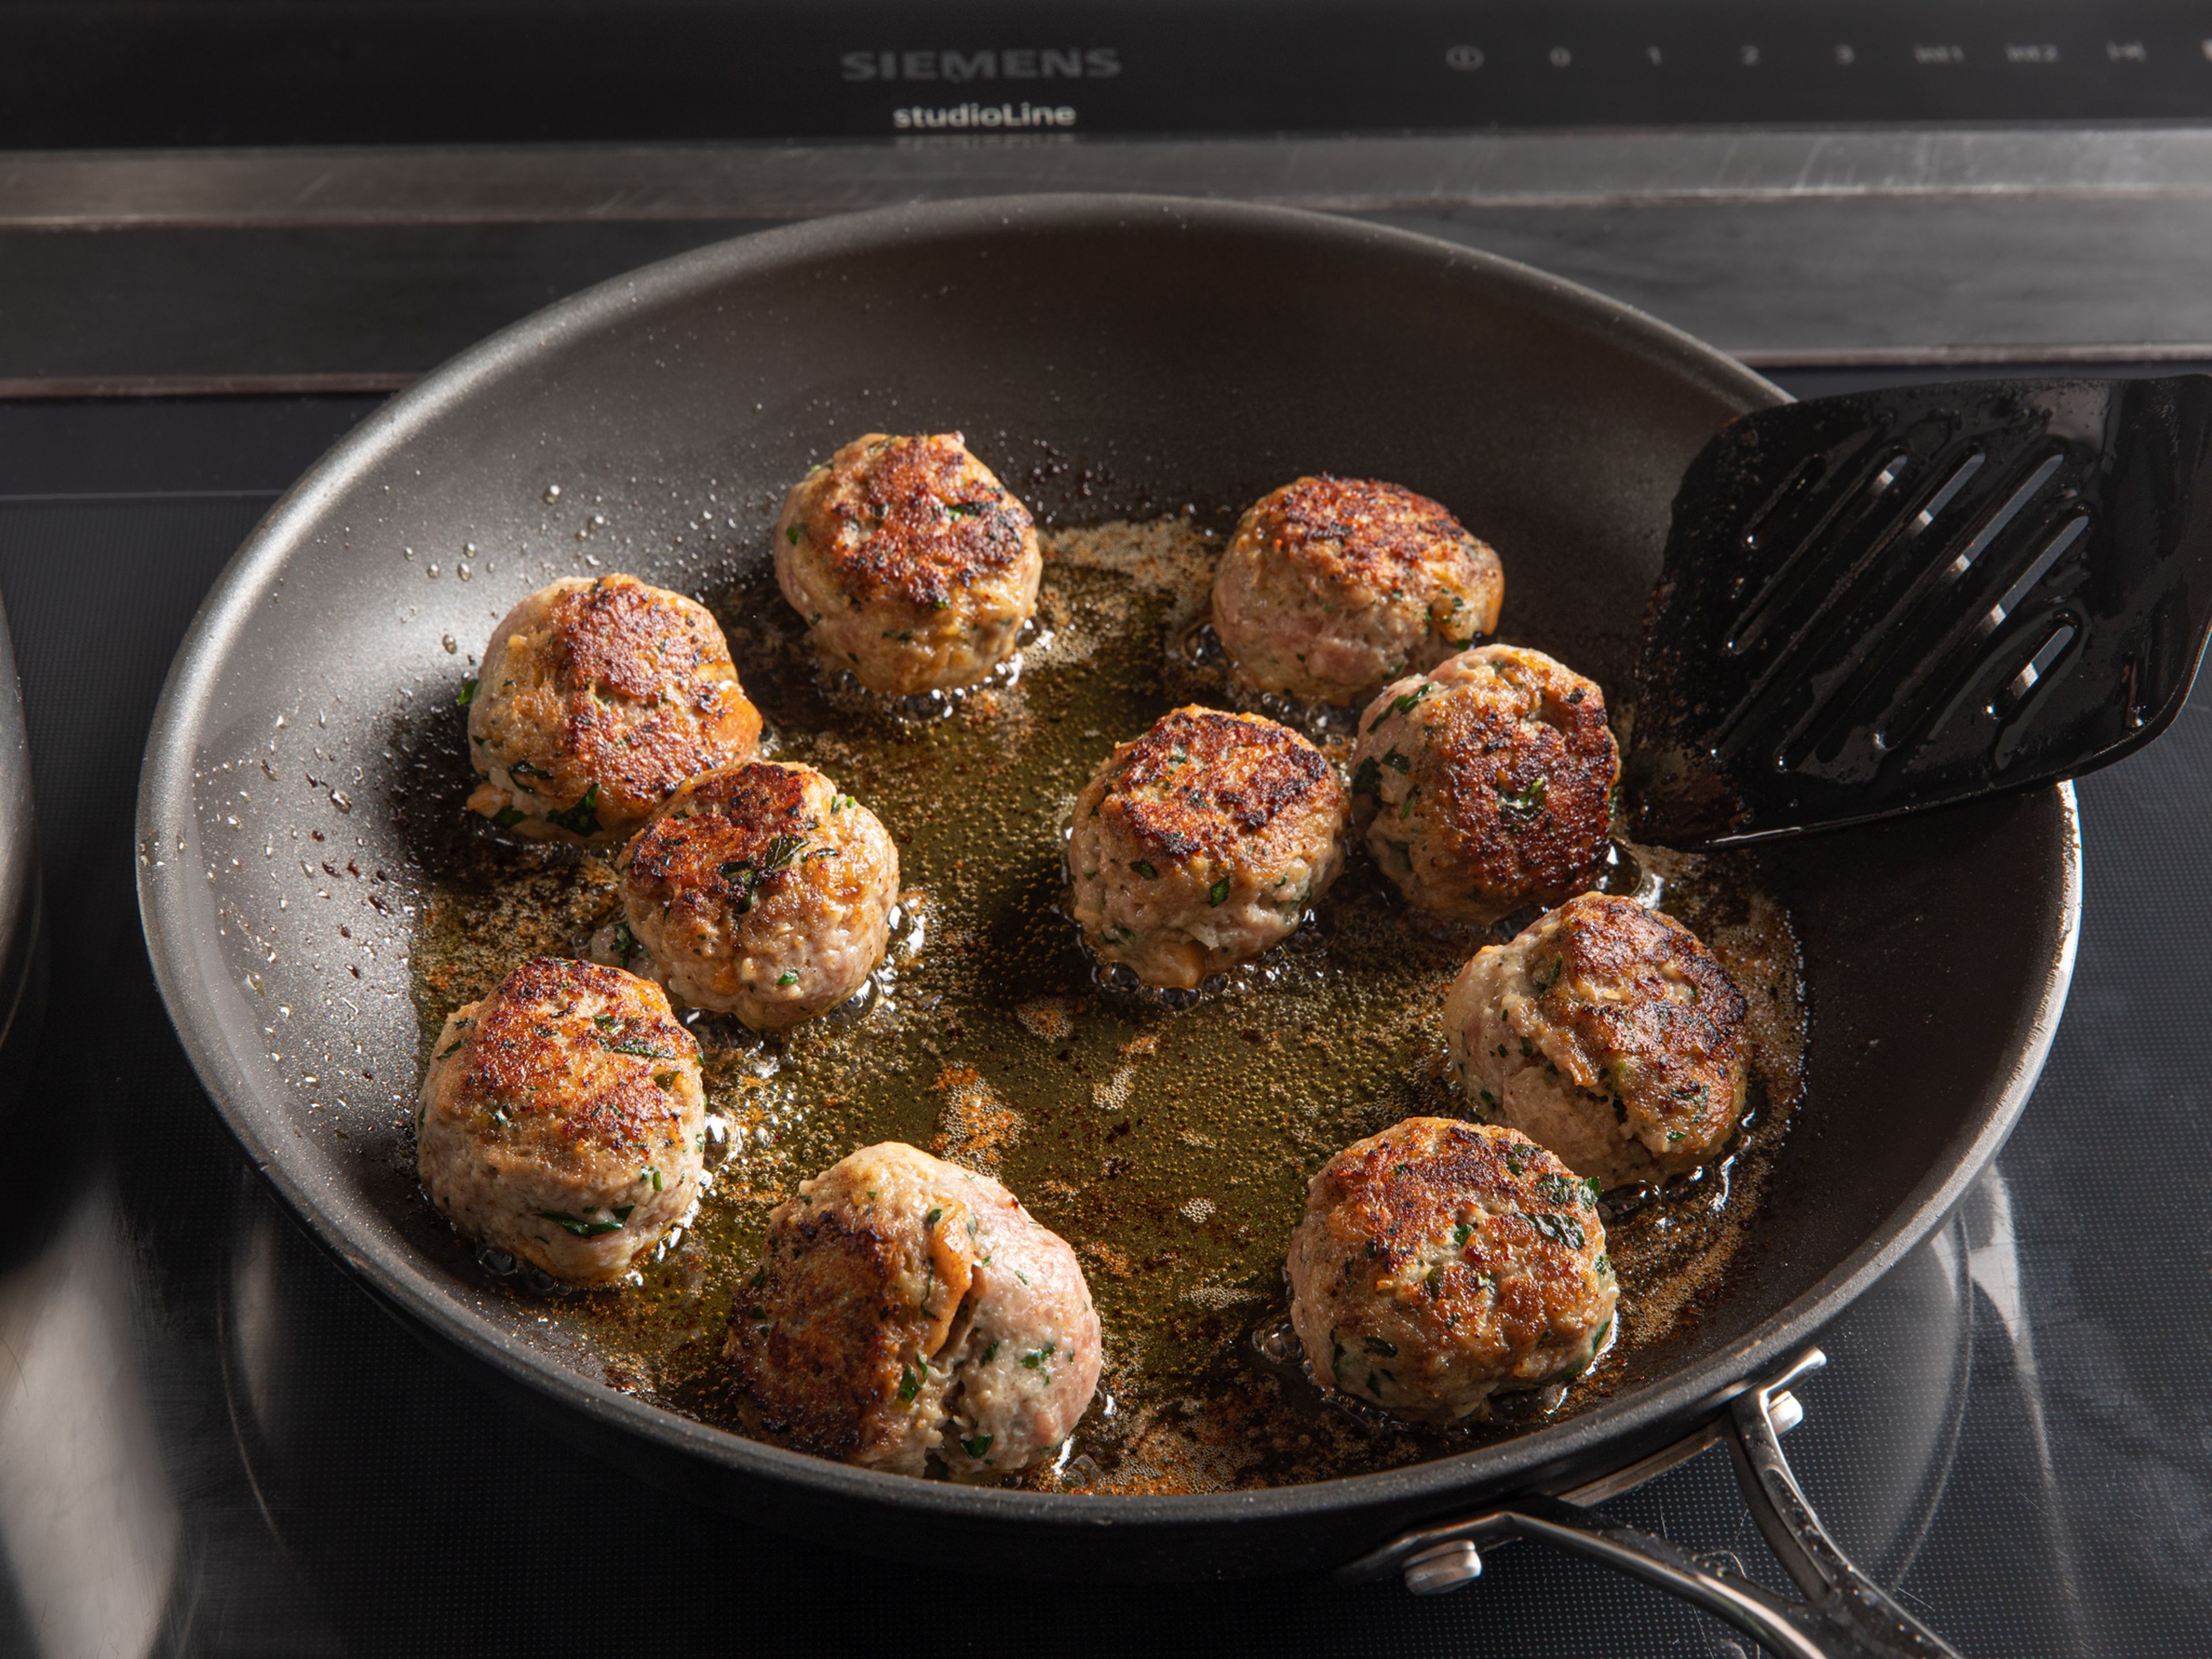 Heat a large frying pan on medium heat and add the rest of the olive oil. Add half of the meatballs and fry for approx. 10 min., gently flipping with a spatula halfway through. Don’t overcrowd the pan to ensure they get a golden brown exterior. Once cooked, remove and place them in a bowl, along with any brown bits on the bottom of the pan. Repeat in batches, as needed, until used up.